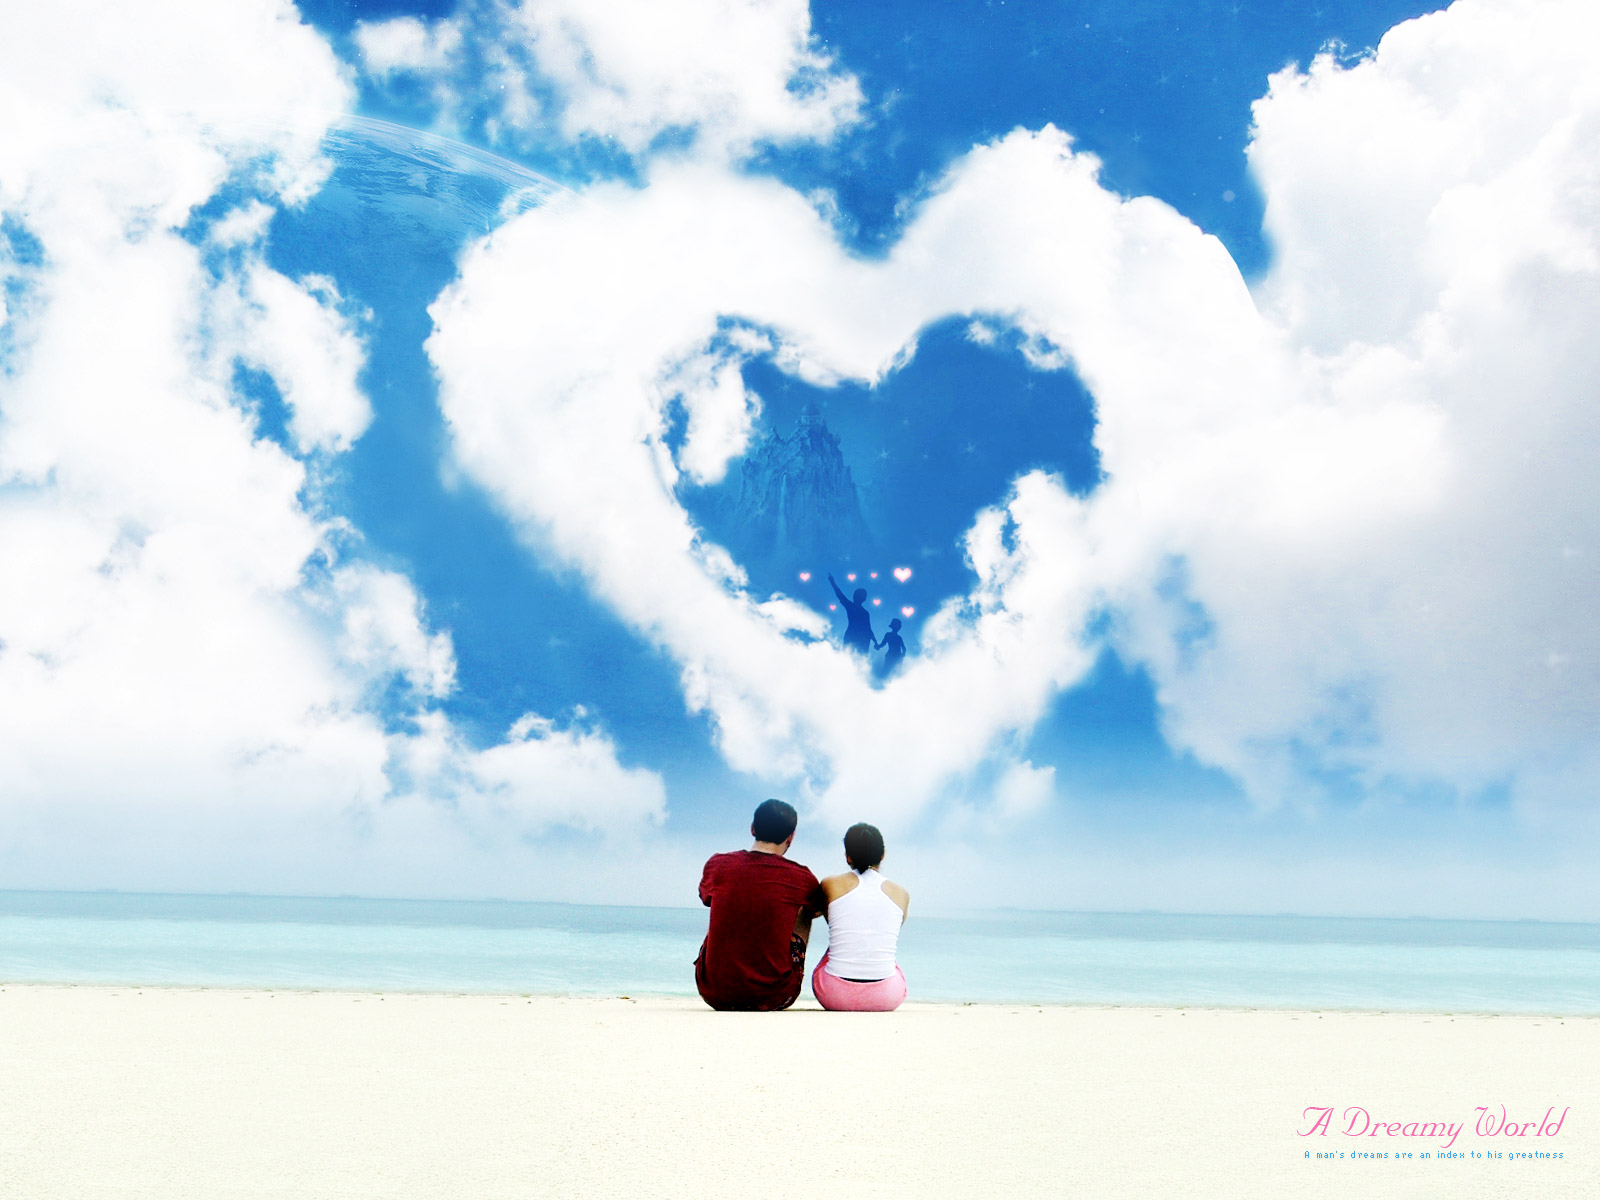 Lovers Dream World Wallpapers HD Backgrounds